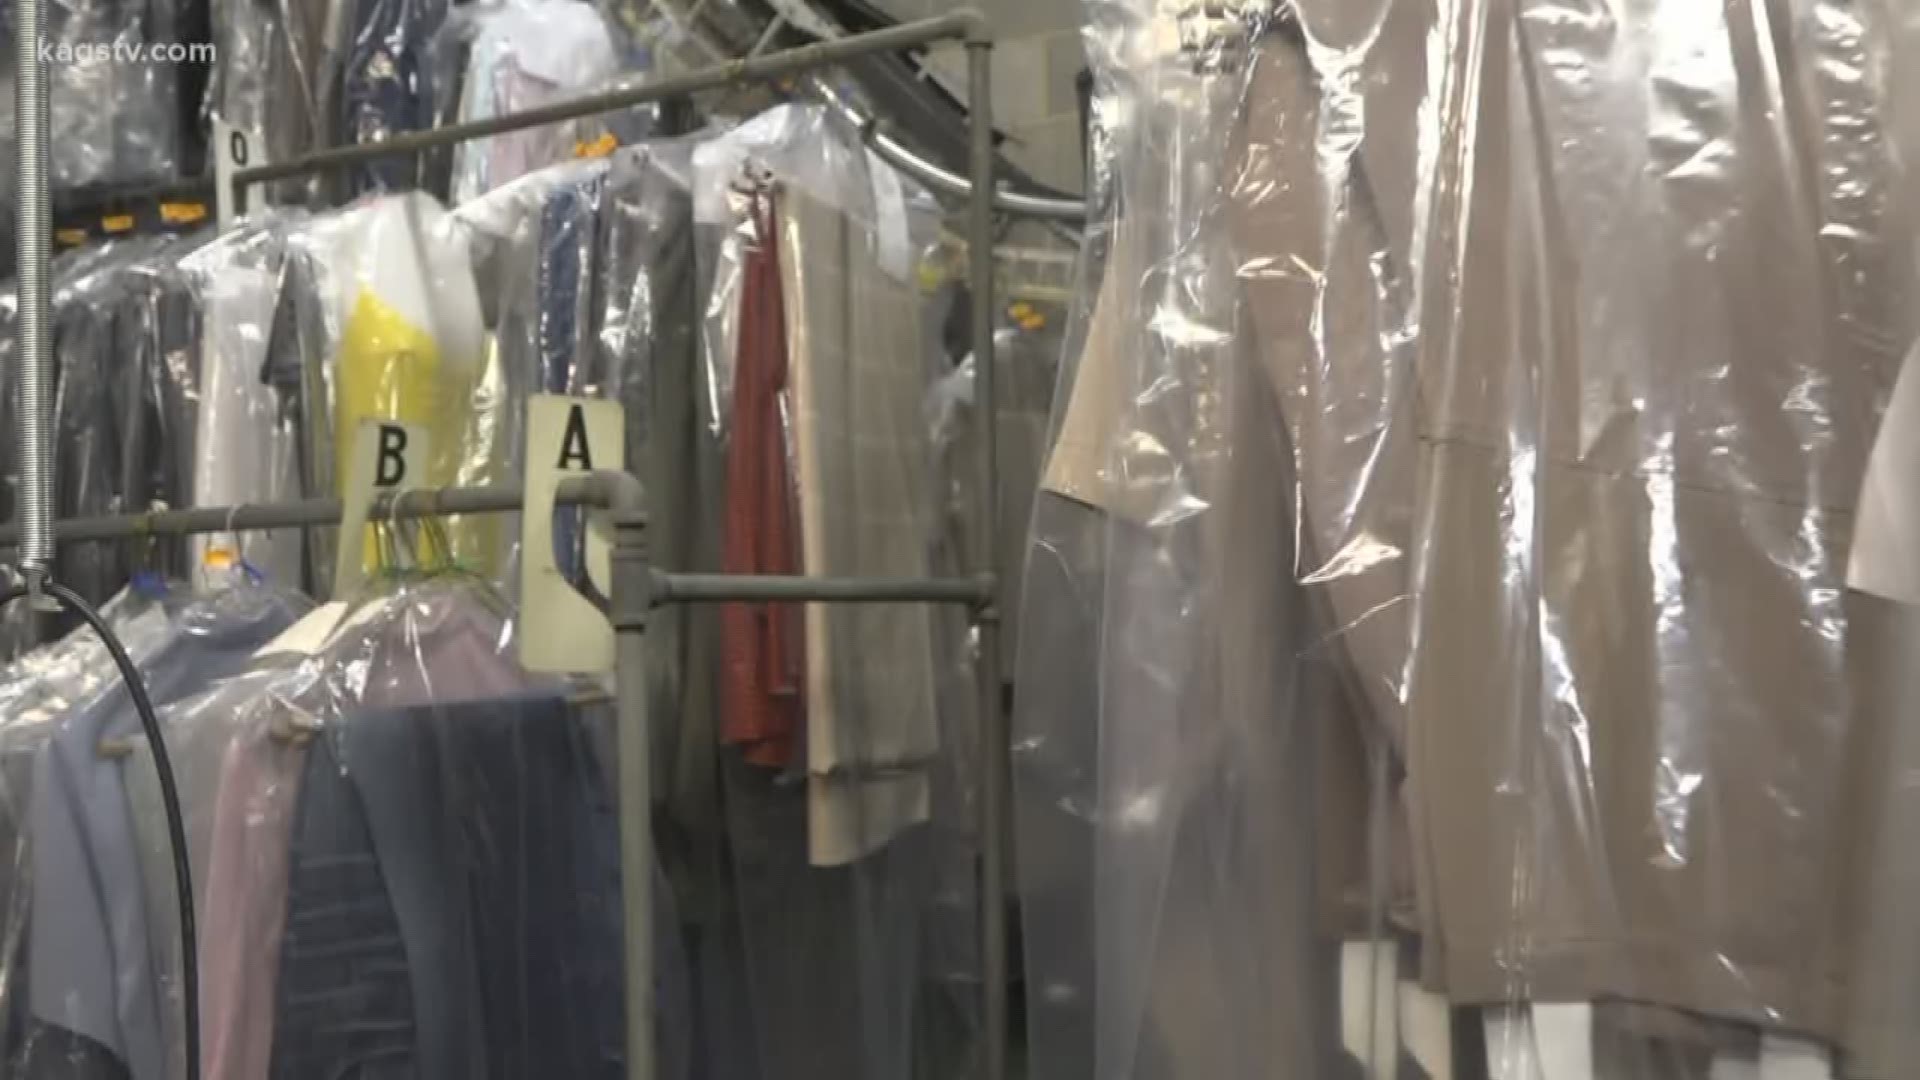 The Aggie owned and family-owned dry cleaner is open because it is considered an essential business, but it is not seeing the same number of customers from January.